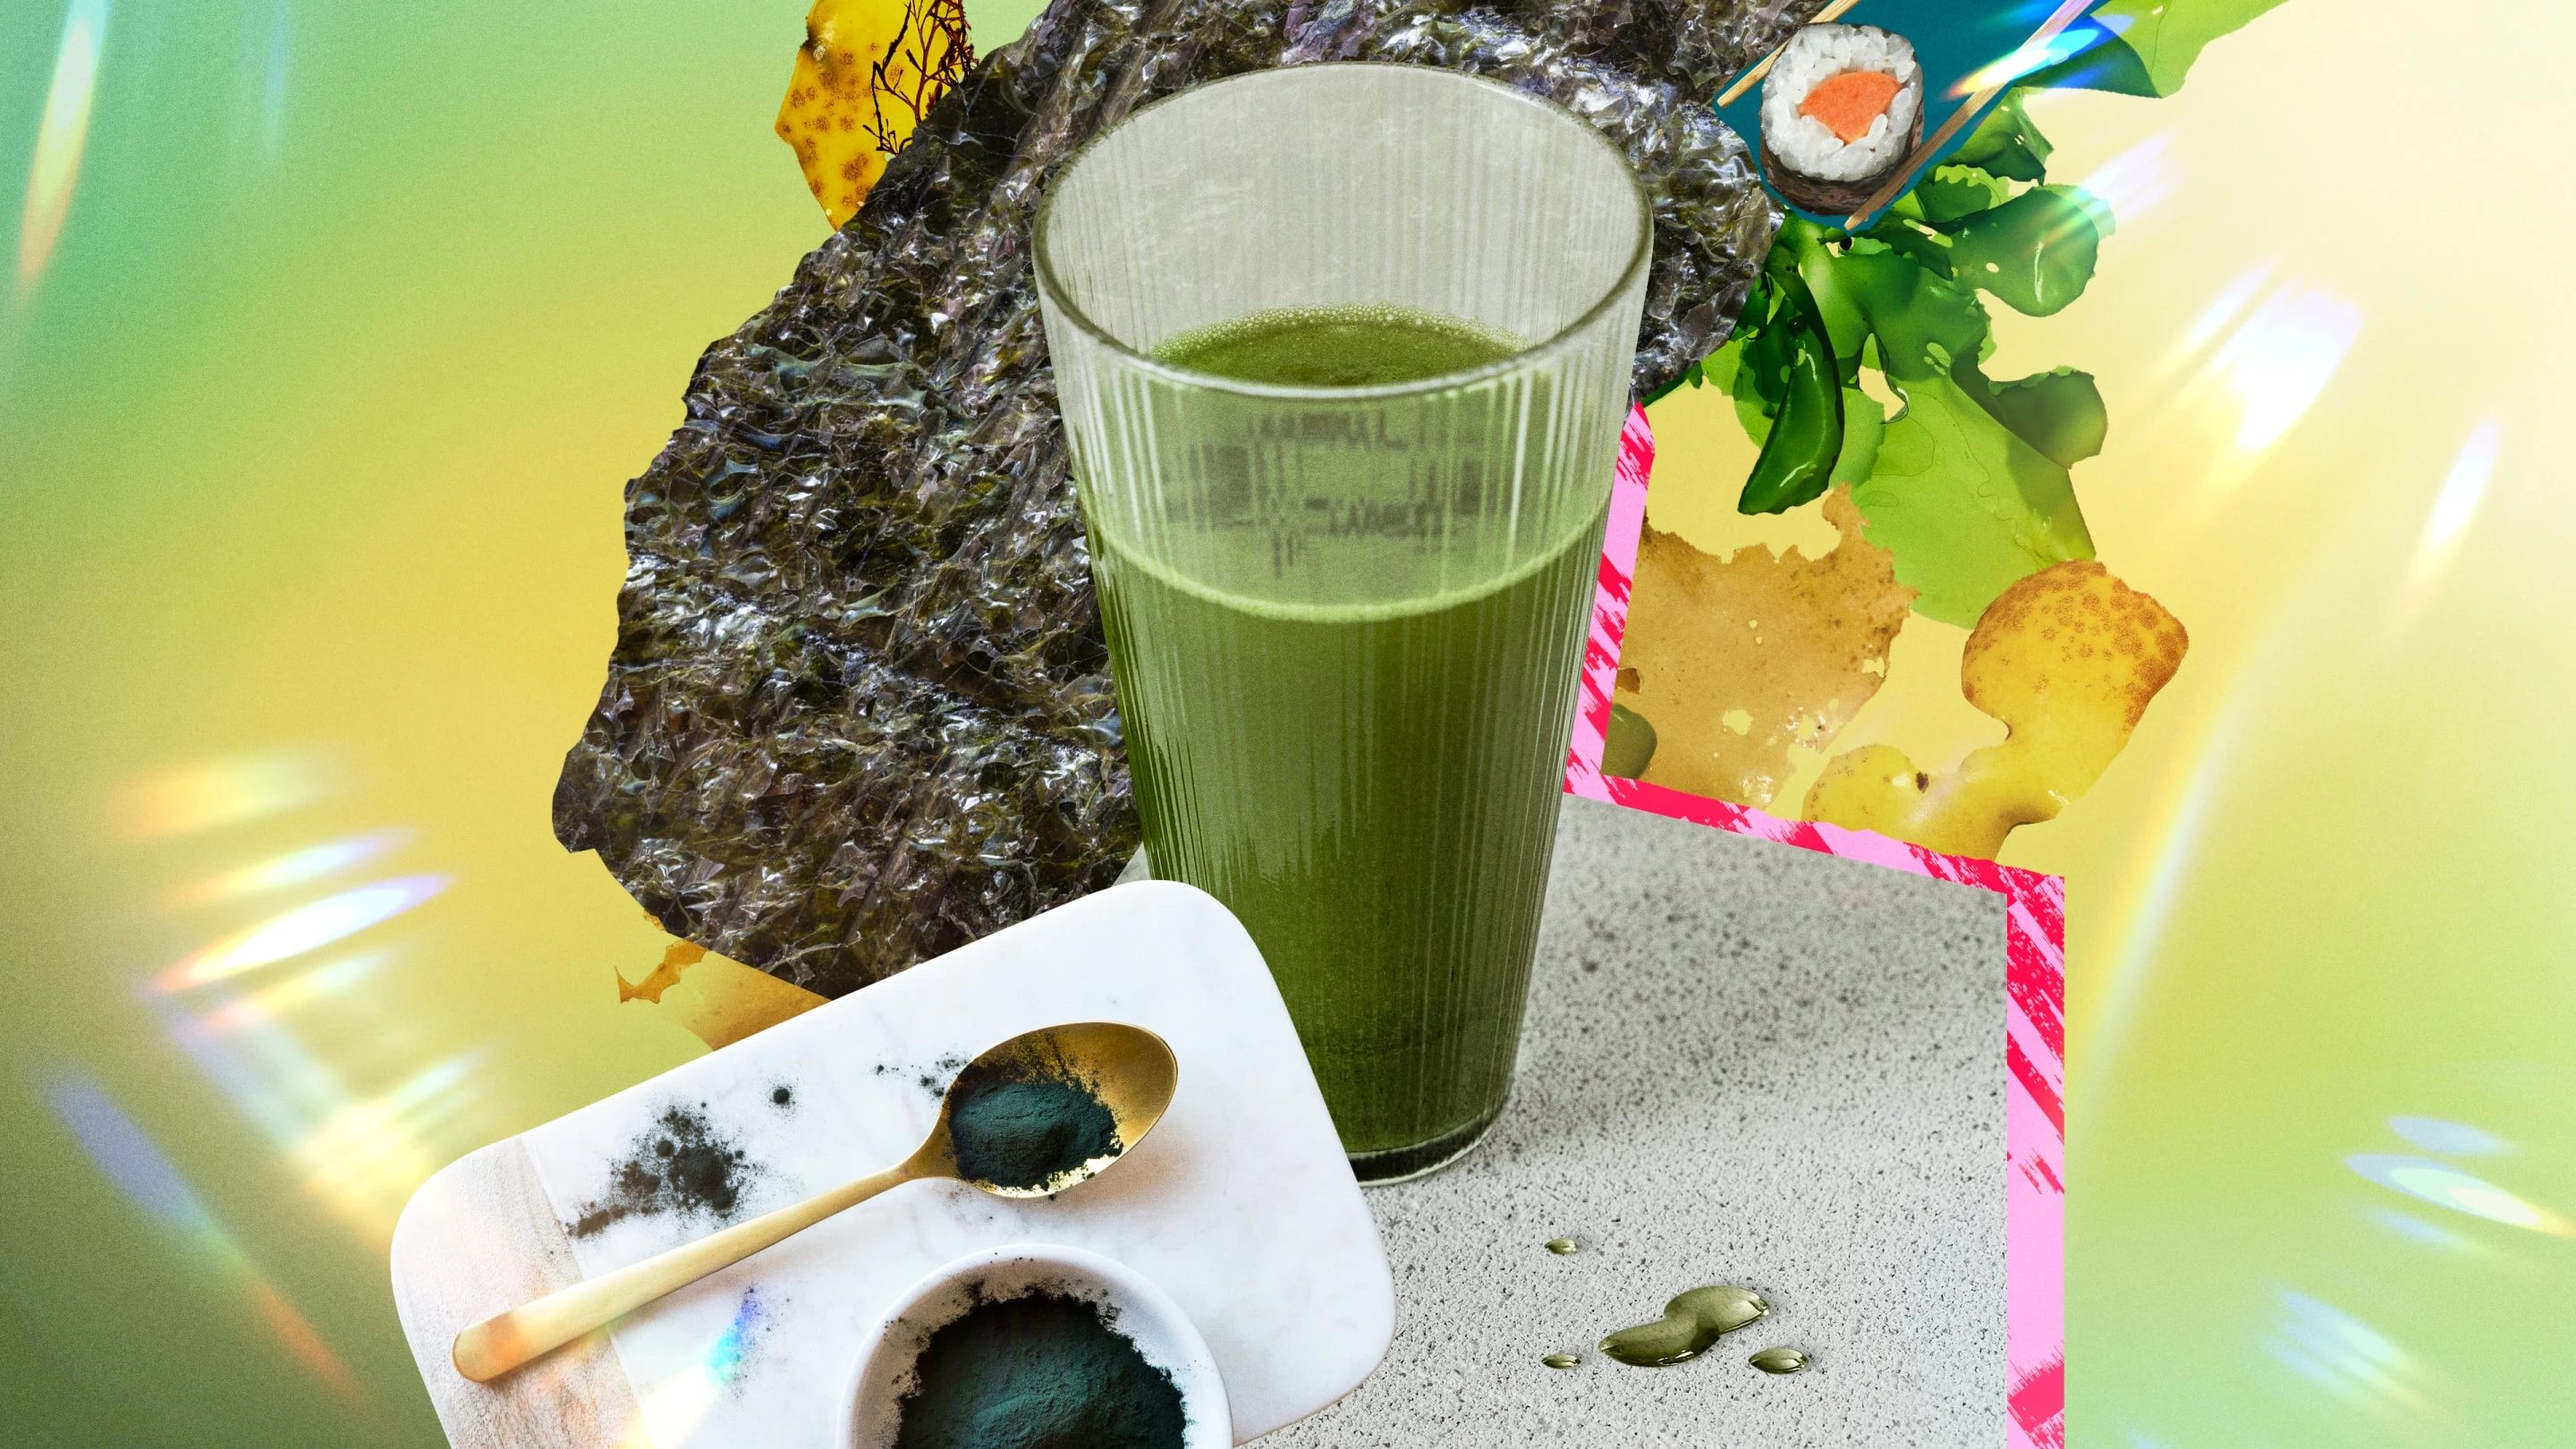 Green juice in a glass centered amongst a collage of seaweed-related items like sushi, powdered seaweed, chopsticks and cooked seaweed.